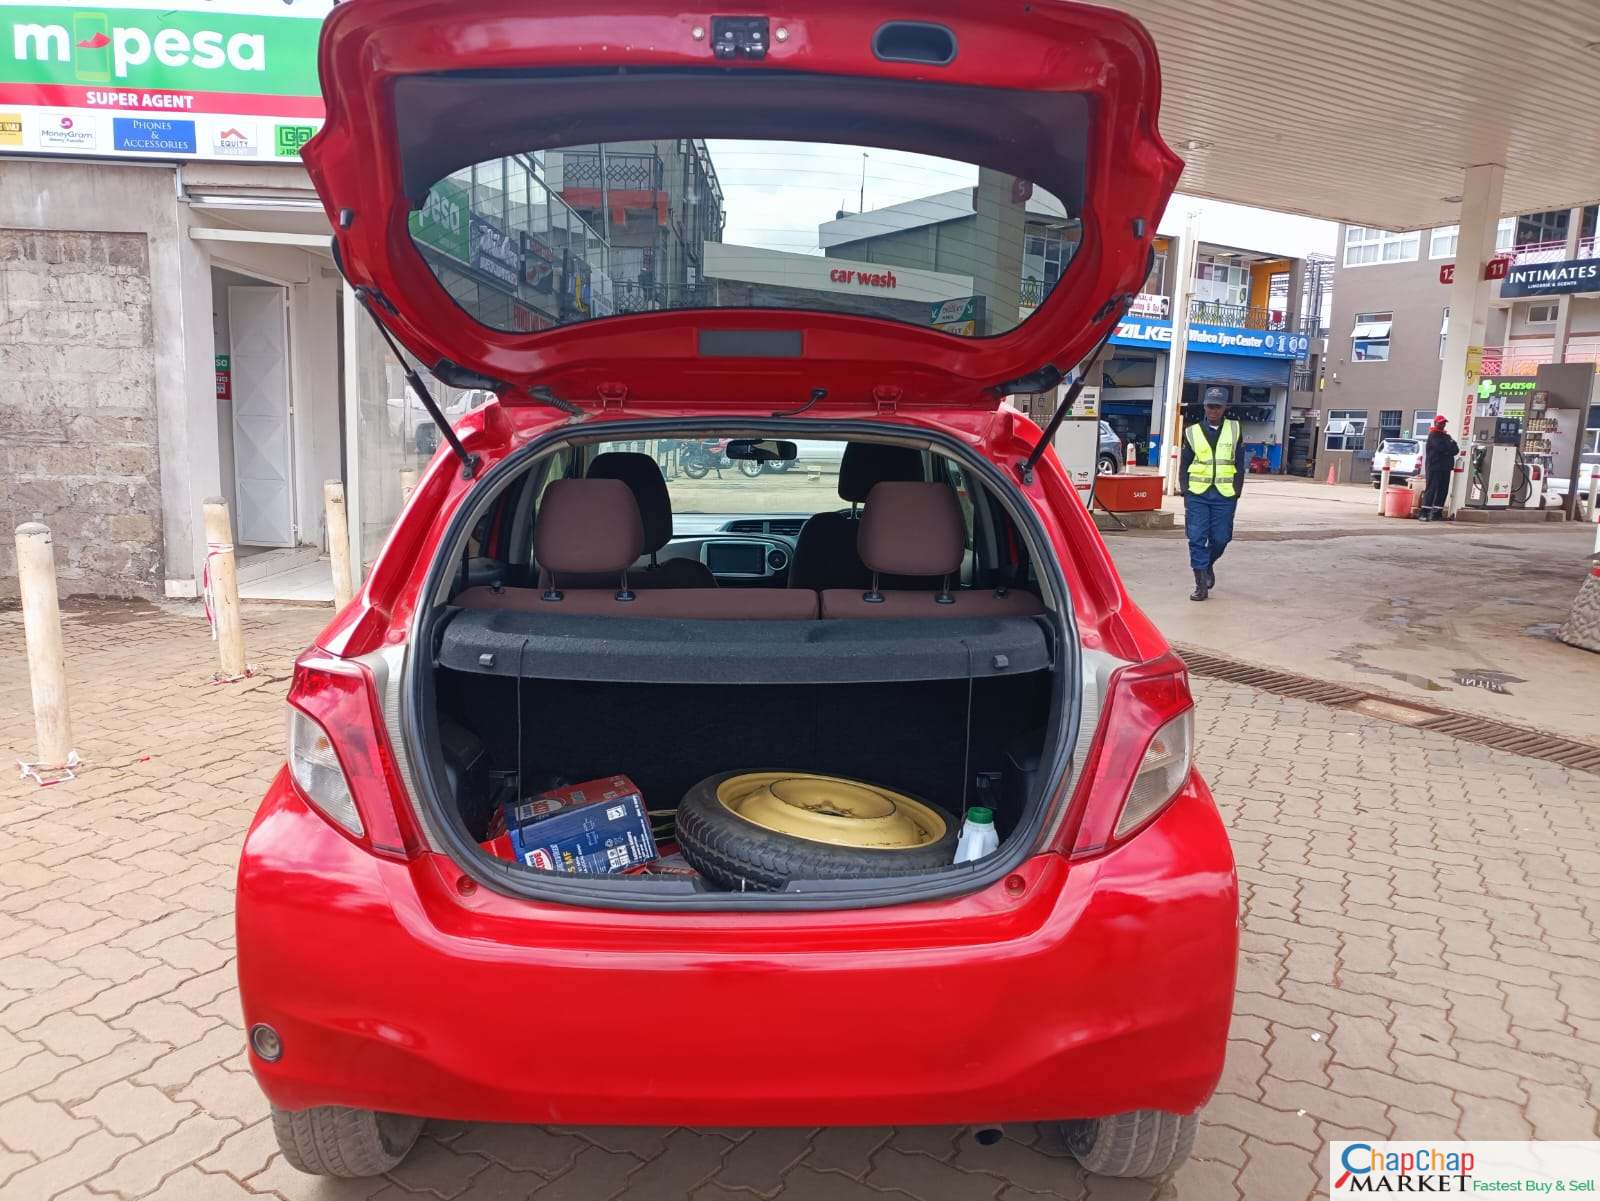 Toyota Vitz for sale in Kenya 1300cc You Pay 30% Deposit Trade in OK EXCLUSIVE Hire Purchase Installments bank finance ok